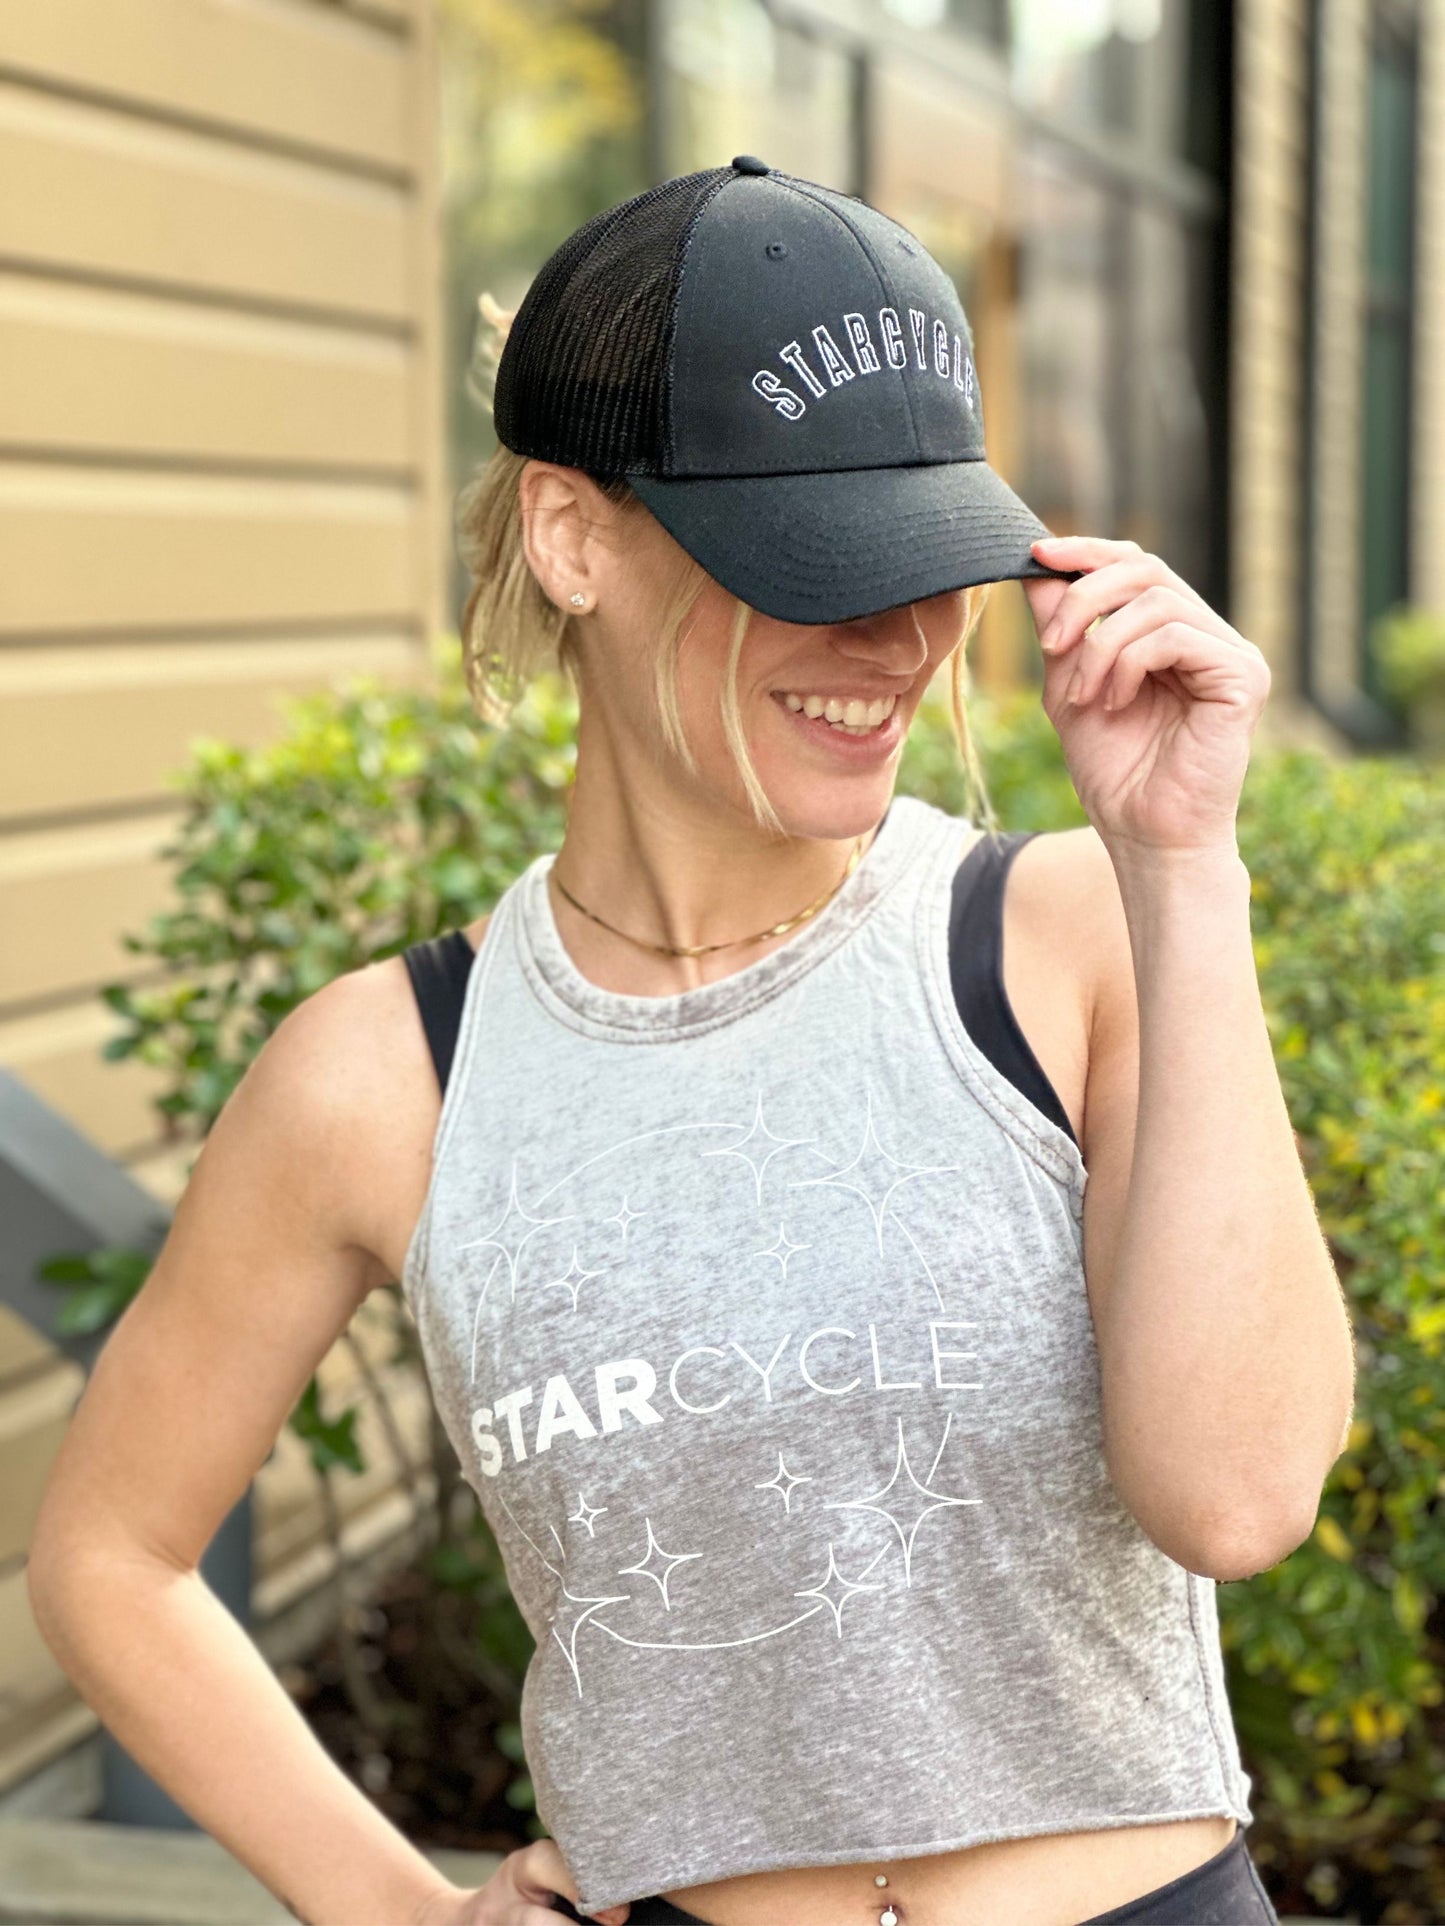 StarCycle Embroidered Hat